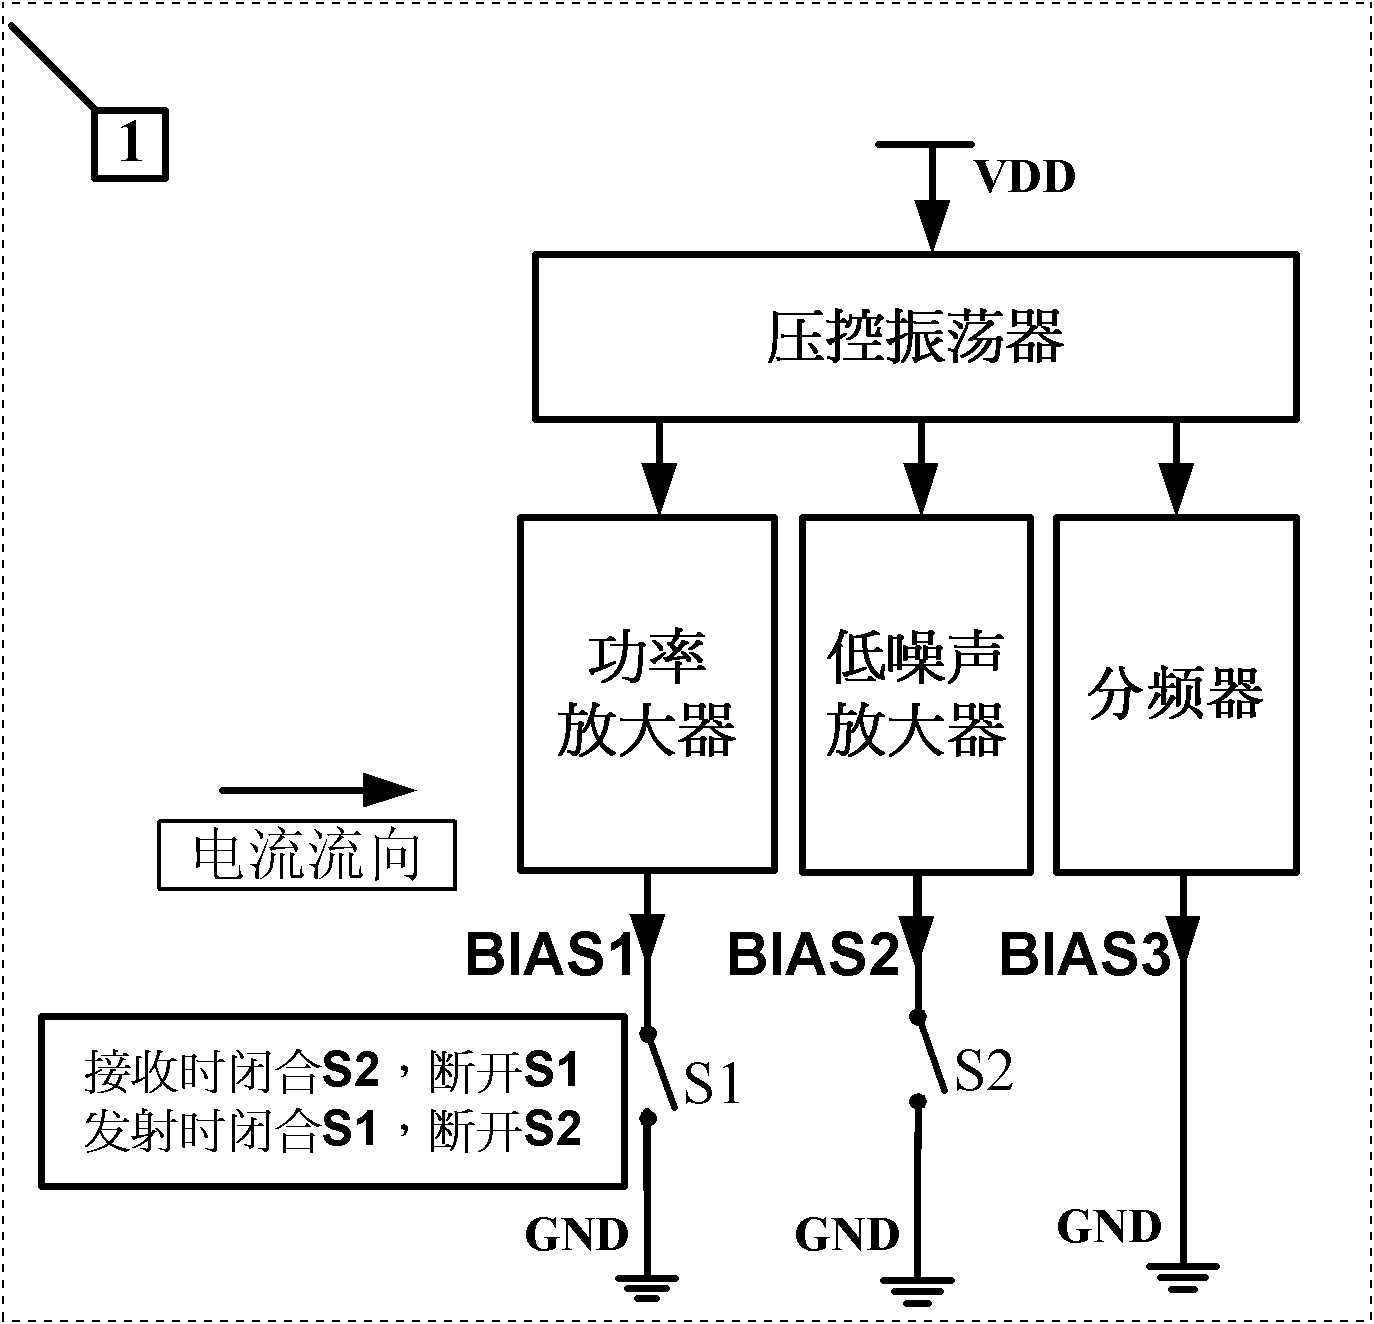 Ultralow-power consumption constant-envelope transceiver system and implementation method thereof